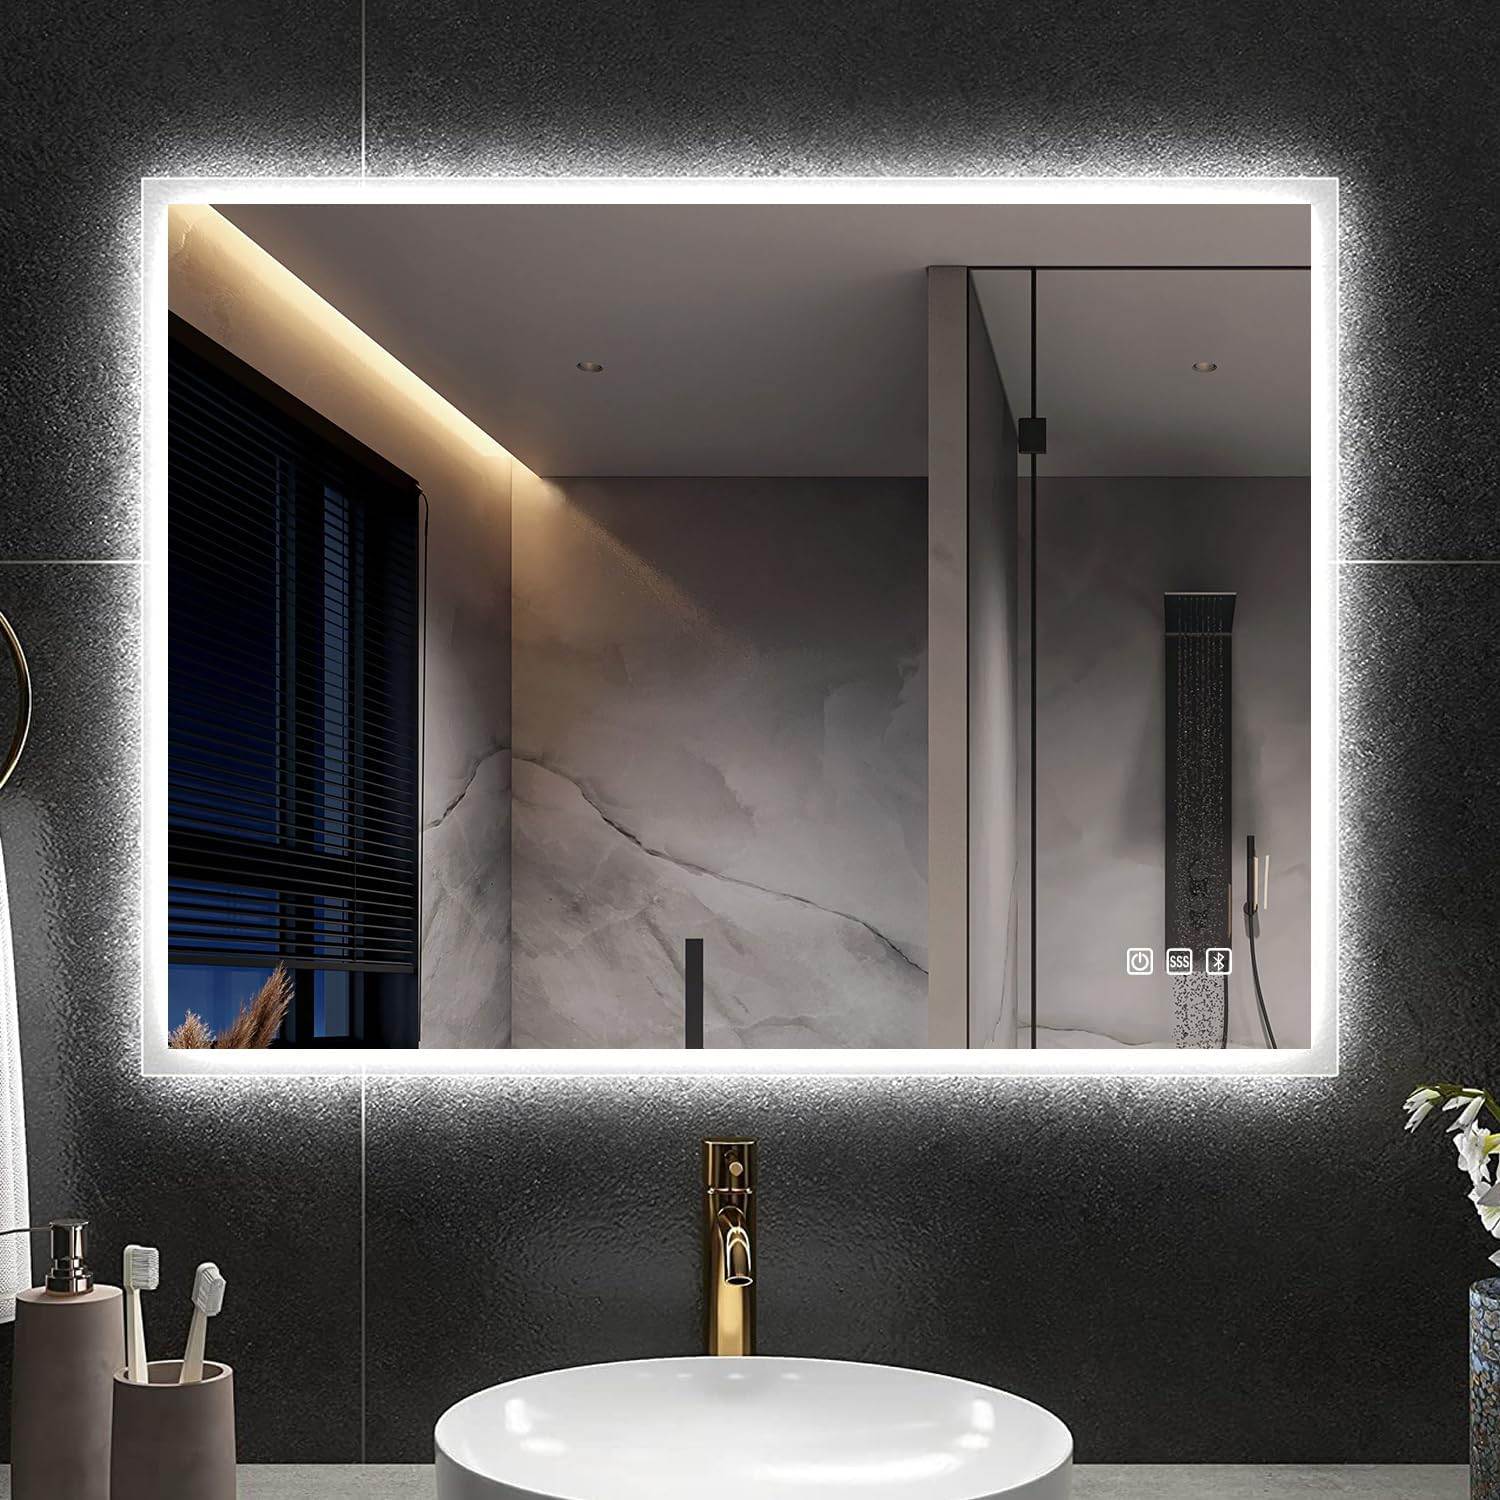 STARLEAD Smart Bathroom Mirror with Memory Touch Button for Vertical or Horizontal Installation ($198.99)